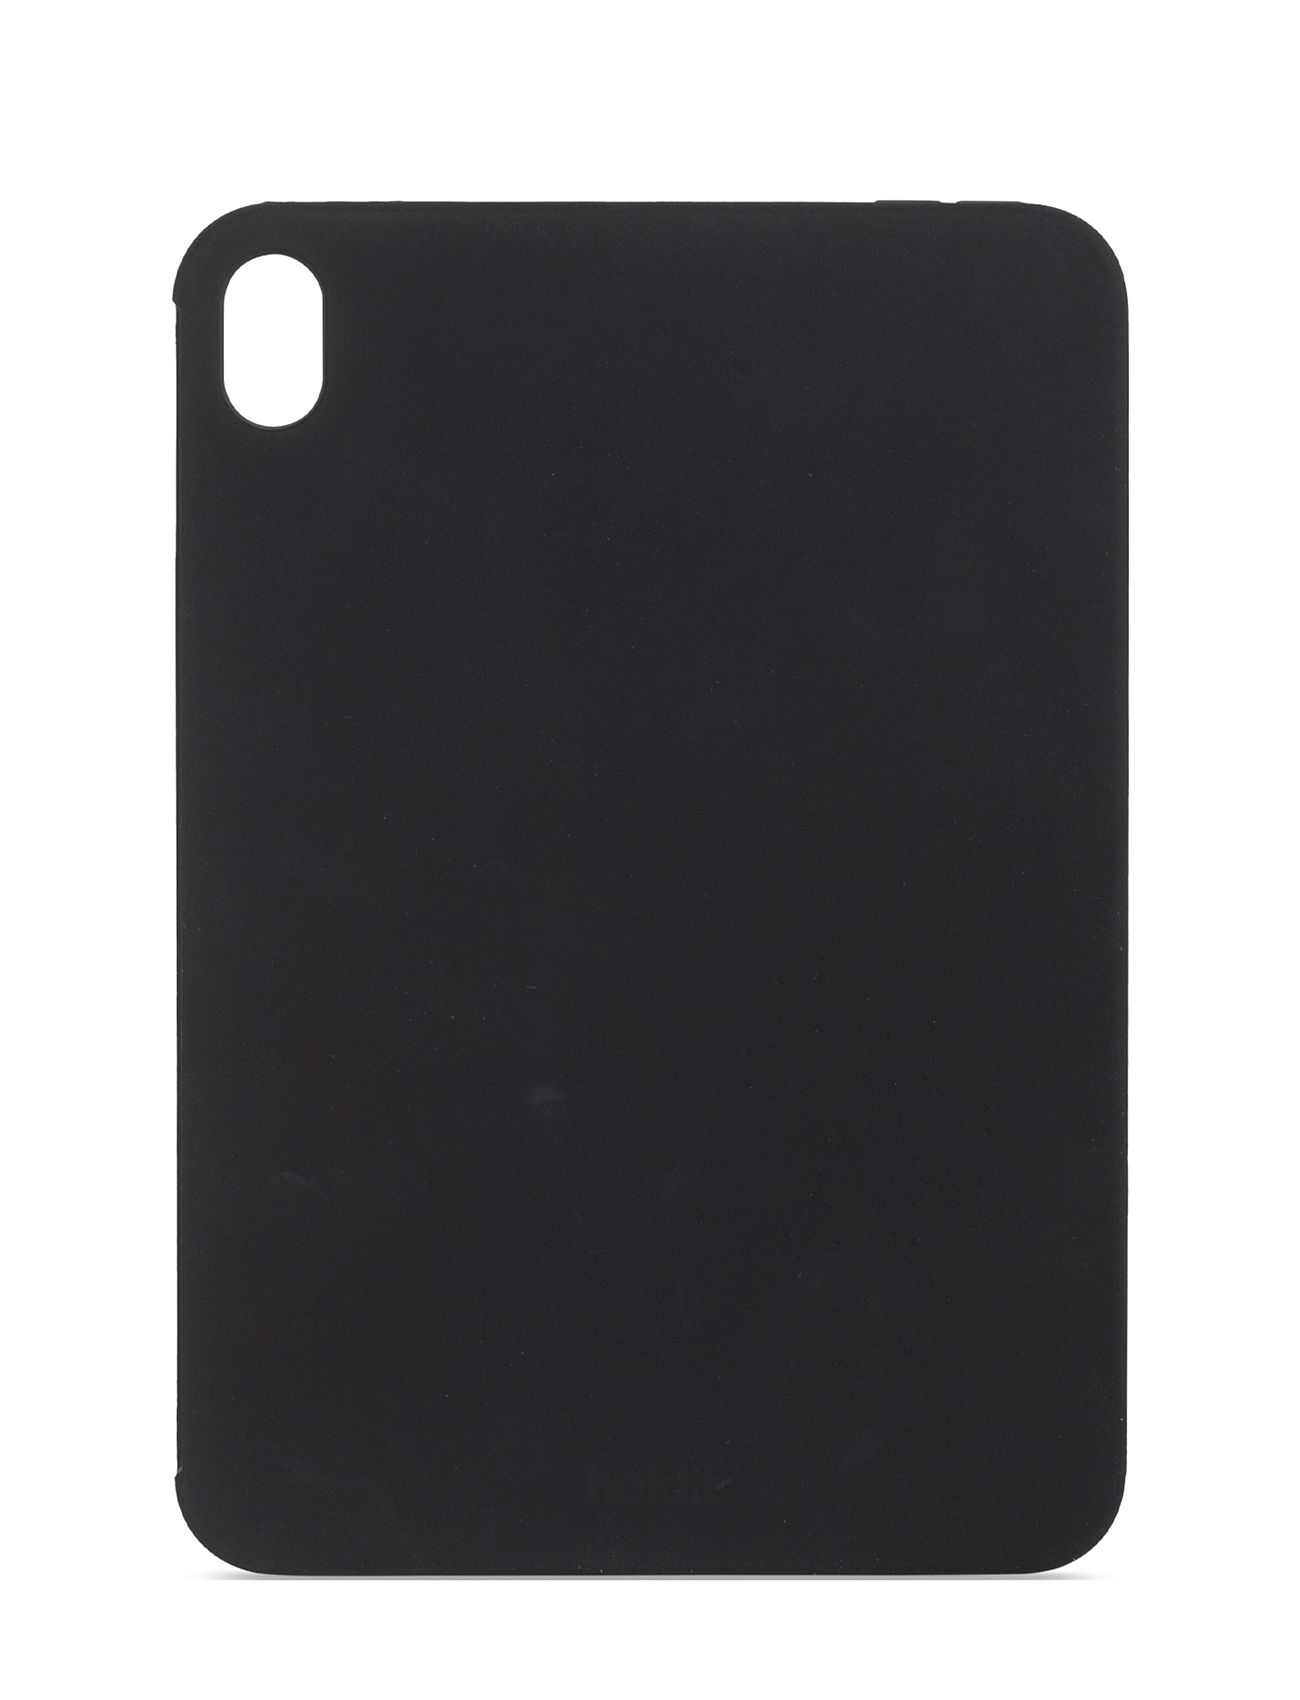 Silic Case Ipad Mini 8.3 Mobilaccessory-covers Tablet Cases Black Holdit